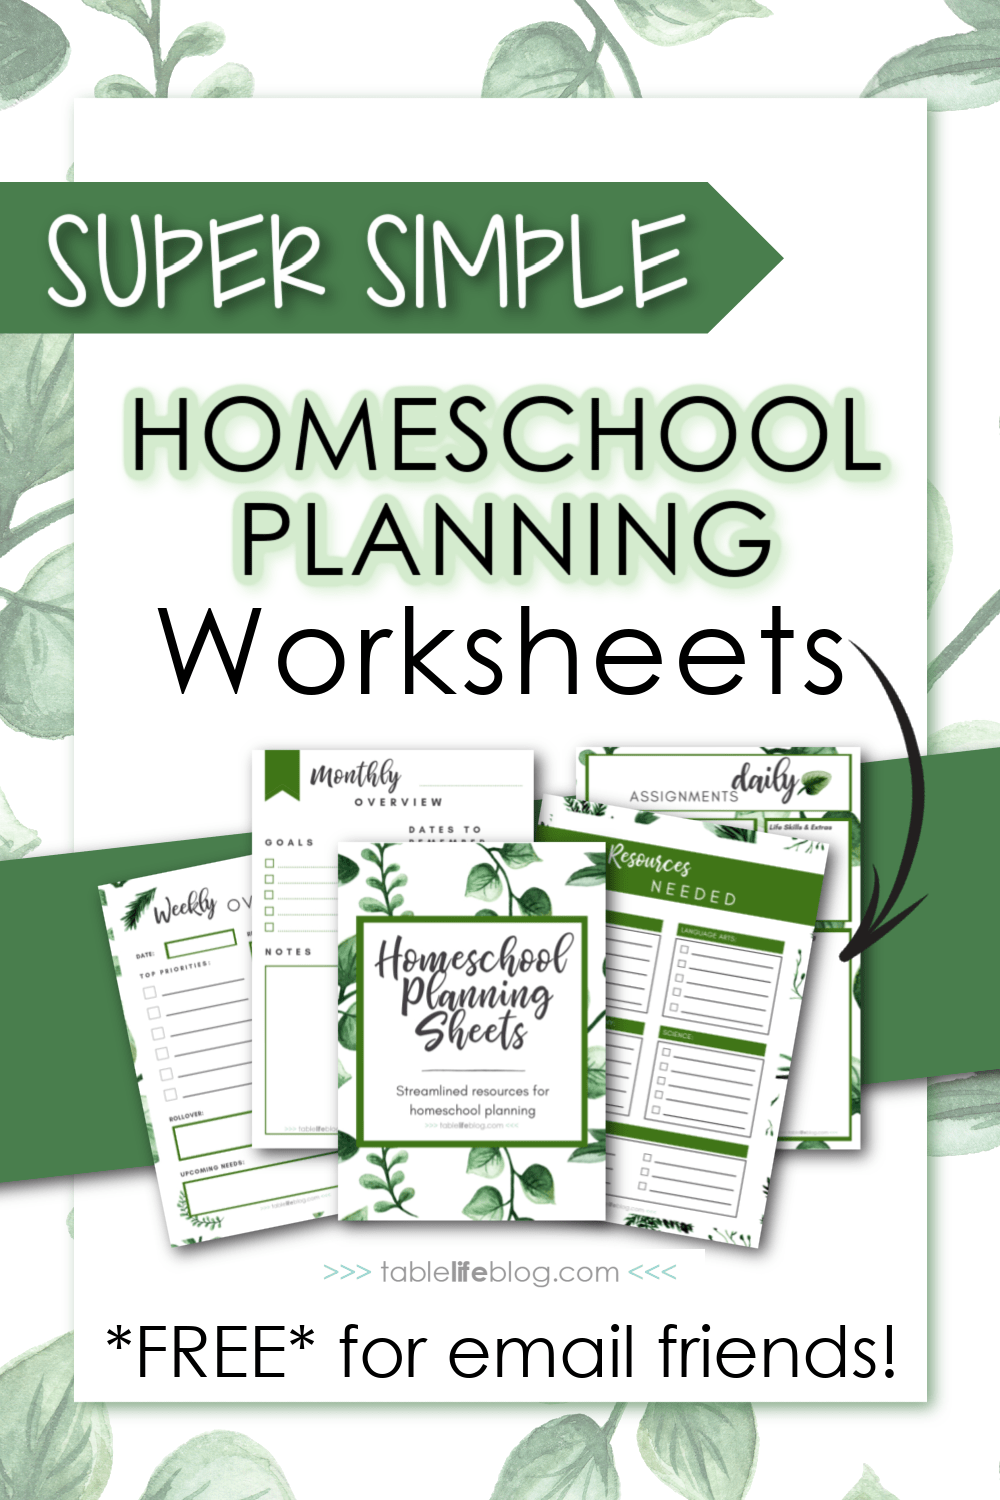 Super Simple Homeschool Planning Worksheets: Free Downloads for Relaxed Homeschooling: